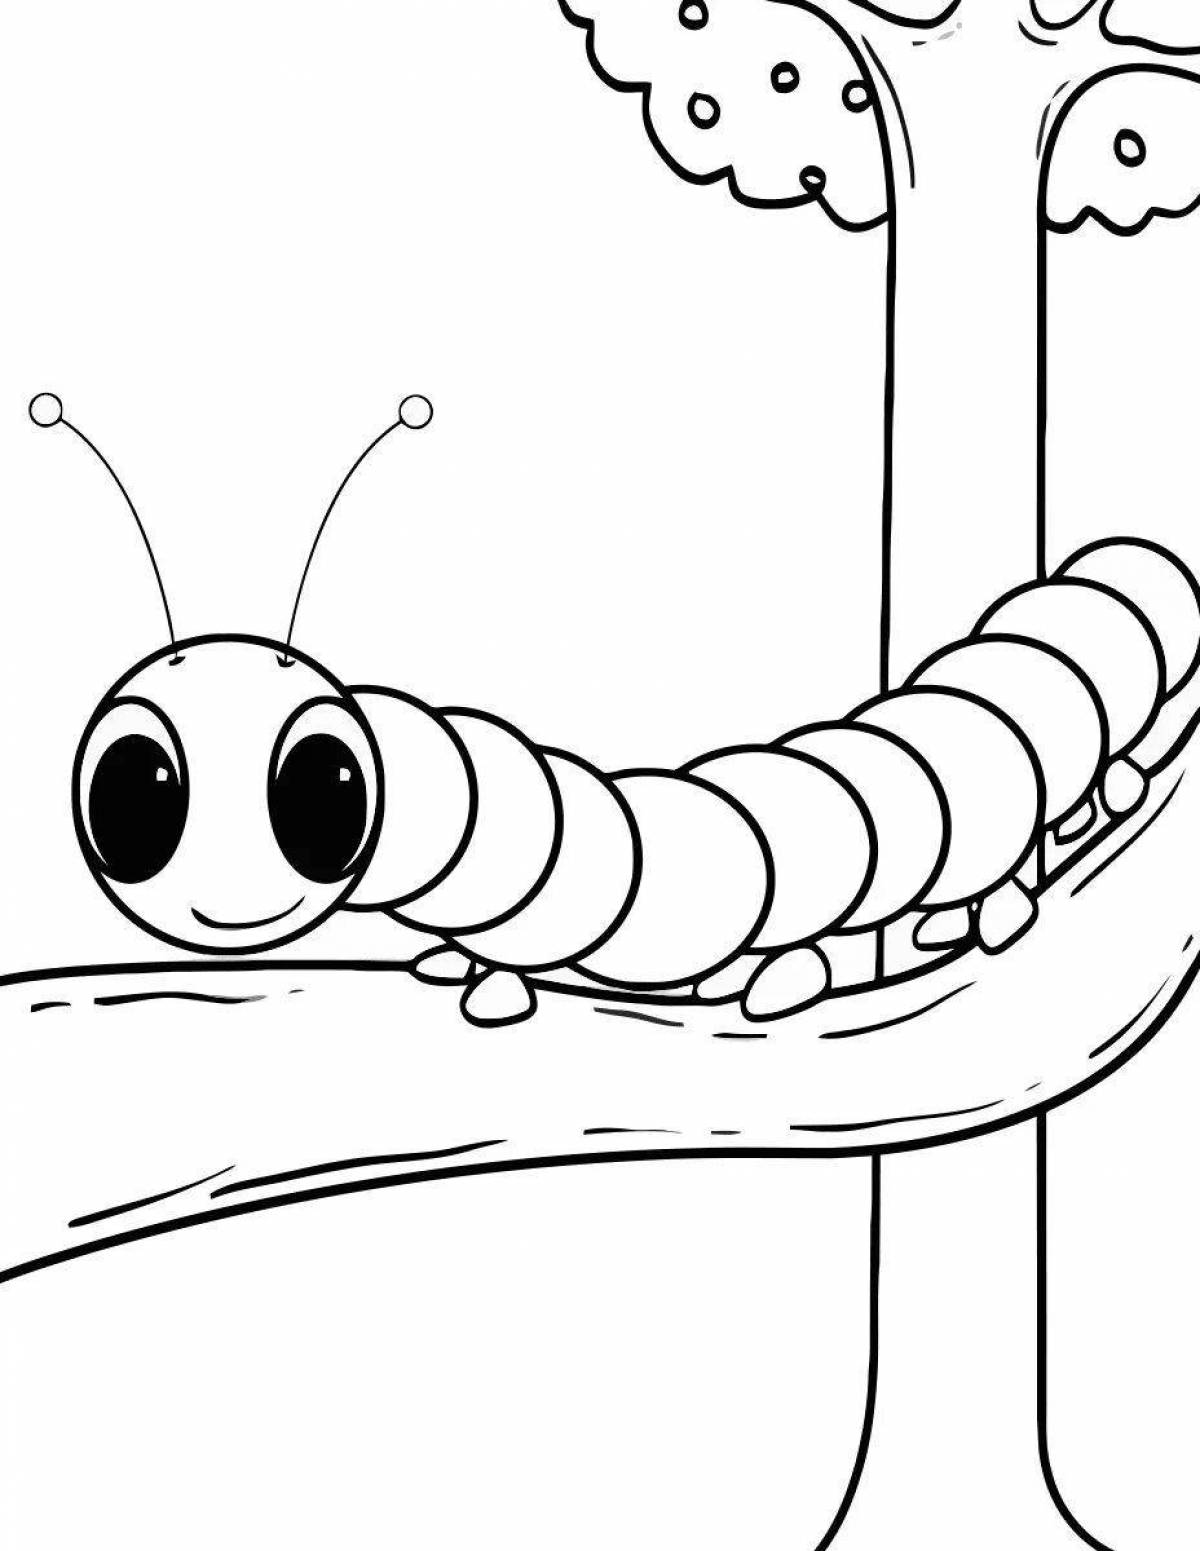 Outstanding caterpillar coloring book for 3-4 year olds